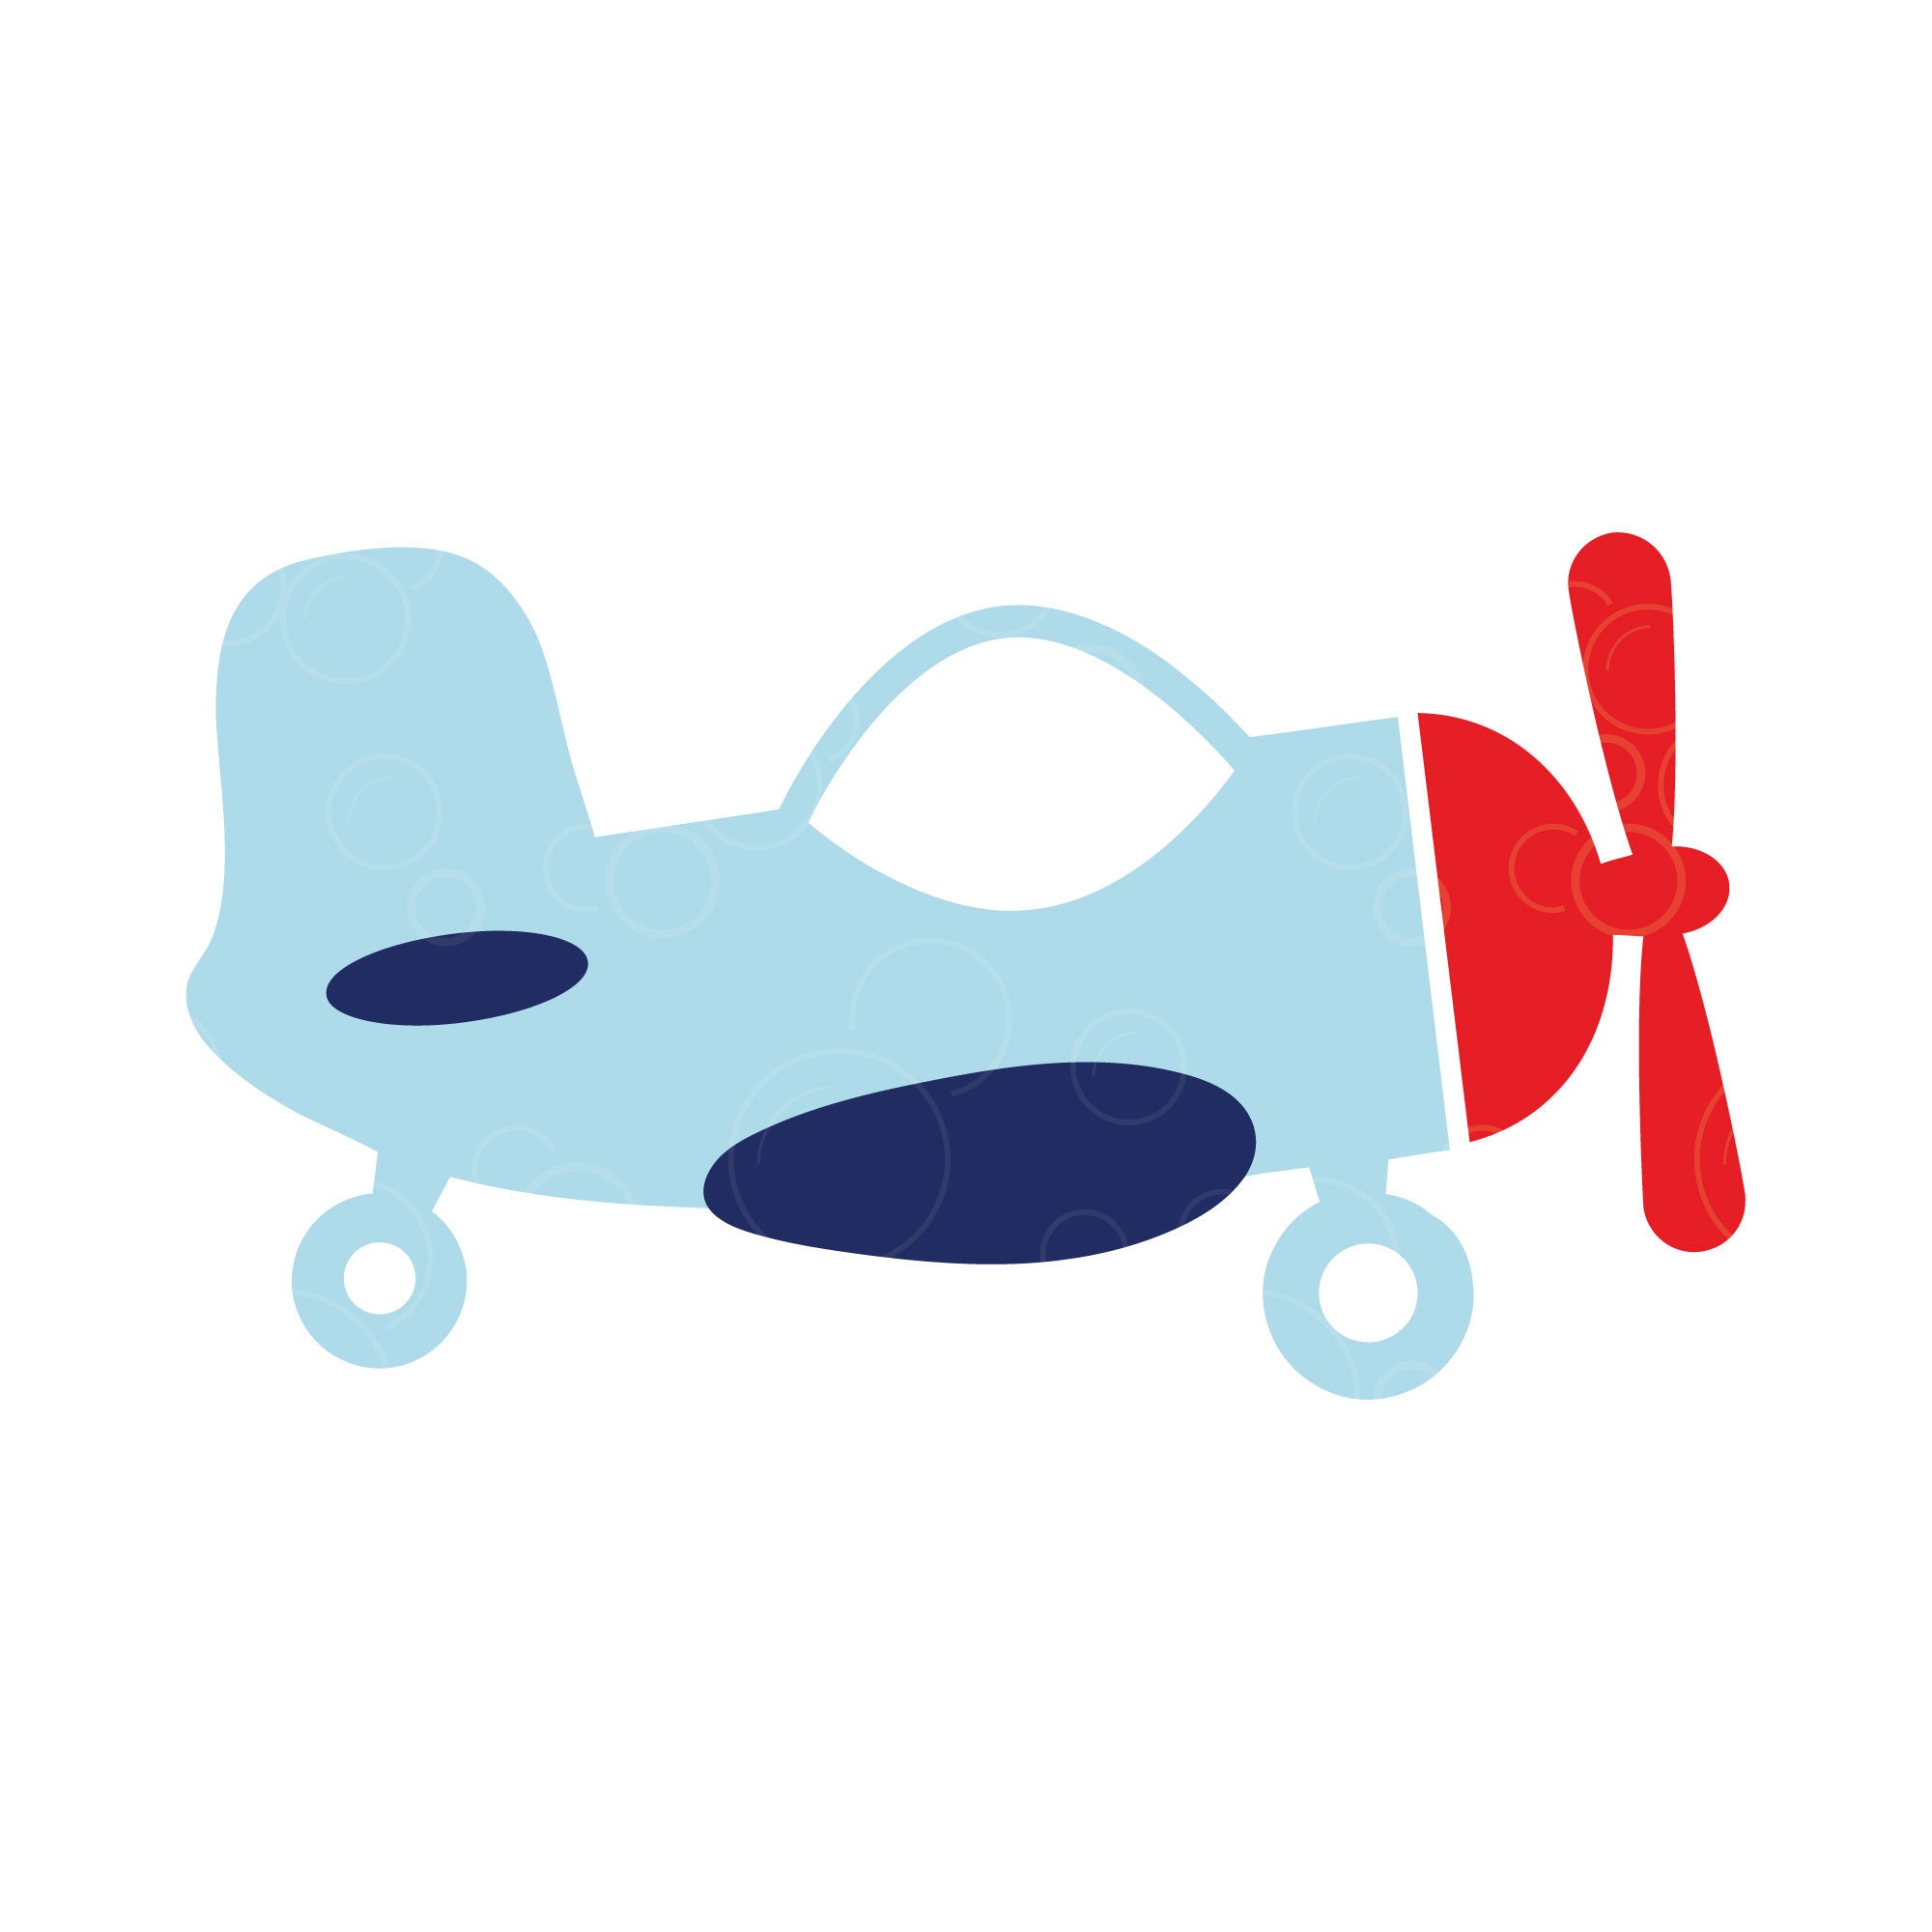 speedy flying plane and swoosh  Logo Template by